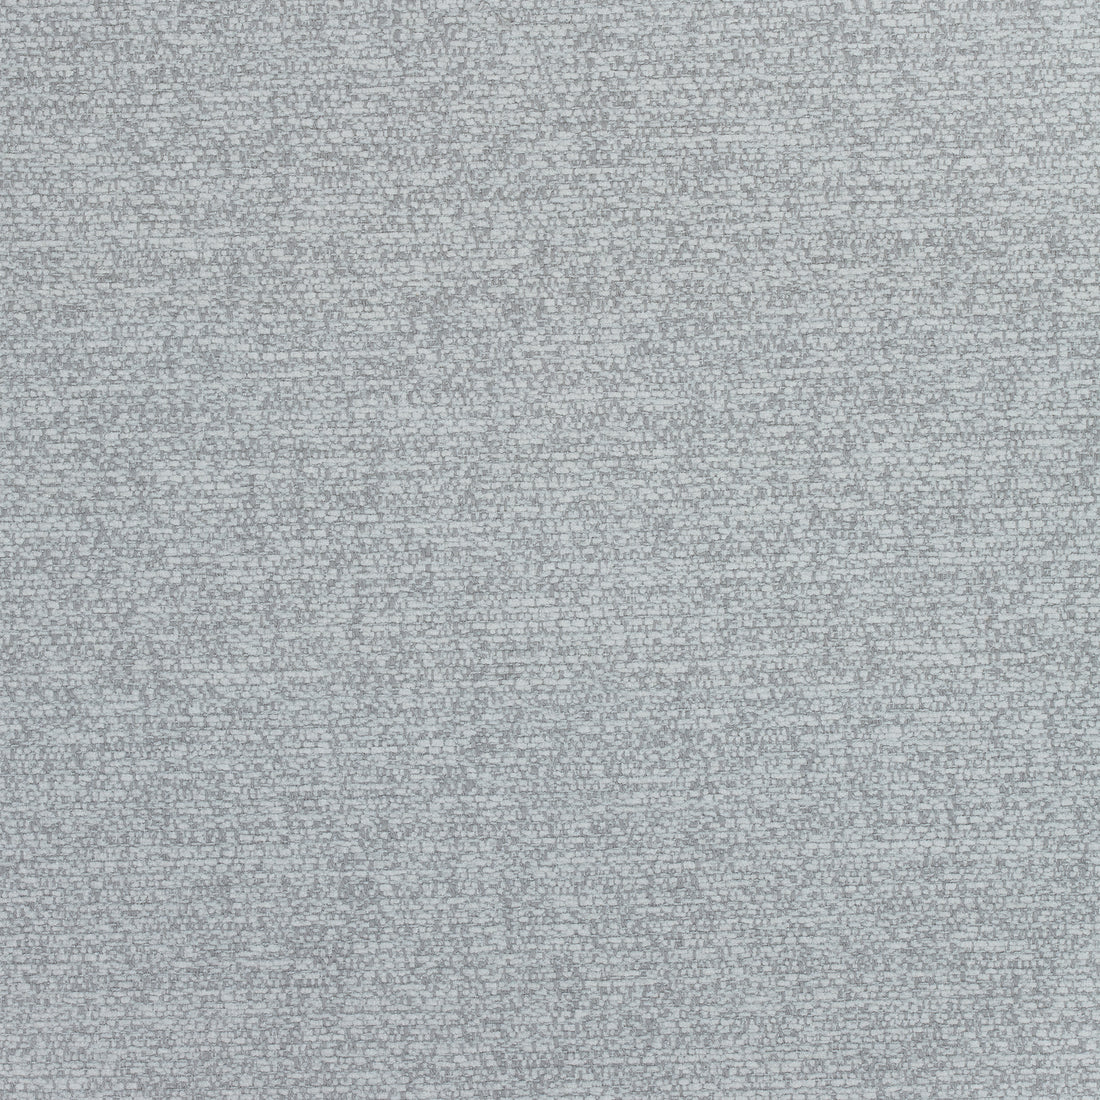 Shiloh fabric in sterling grey color - pattern number W789115 - by Thibaut in the Reverie collection